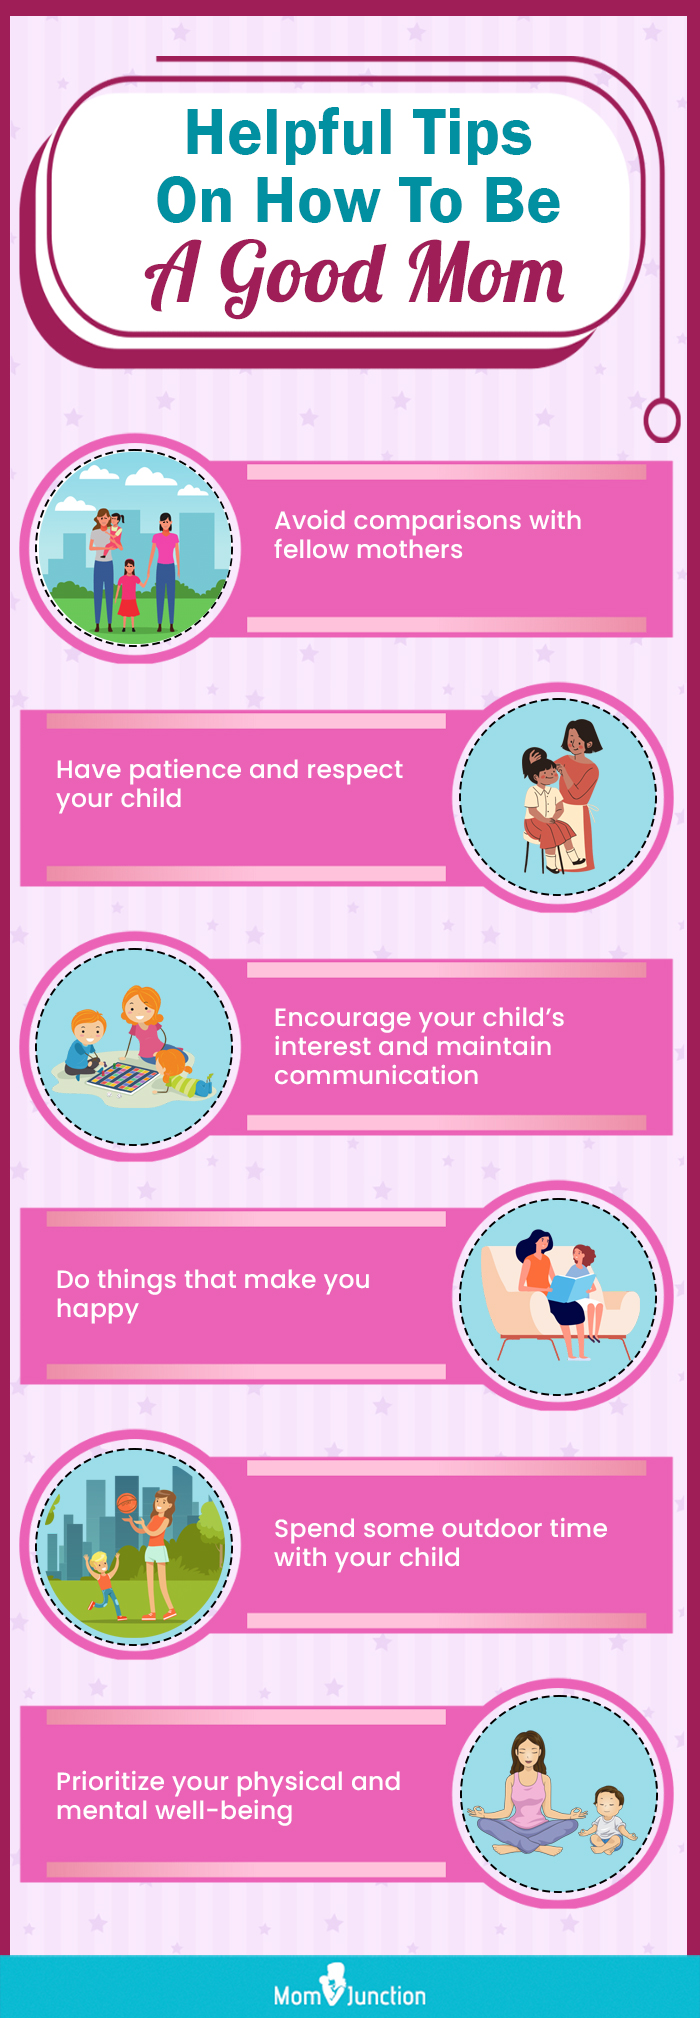 How To Be a Good Mother: 13 Ways, According to Experts - Parade